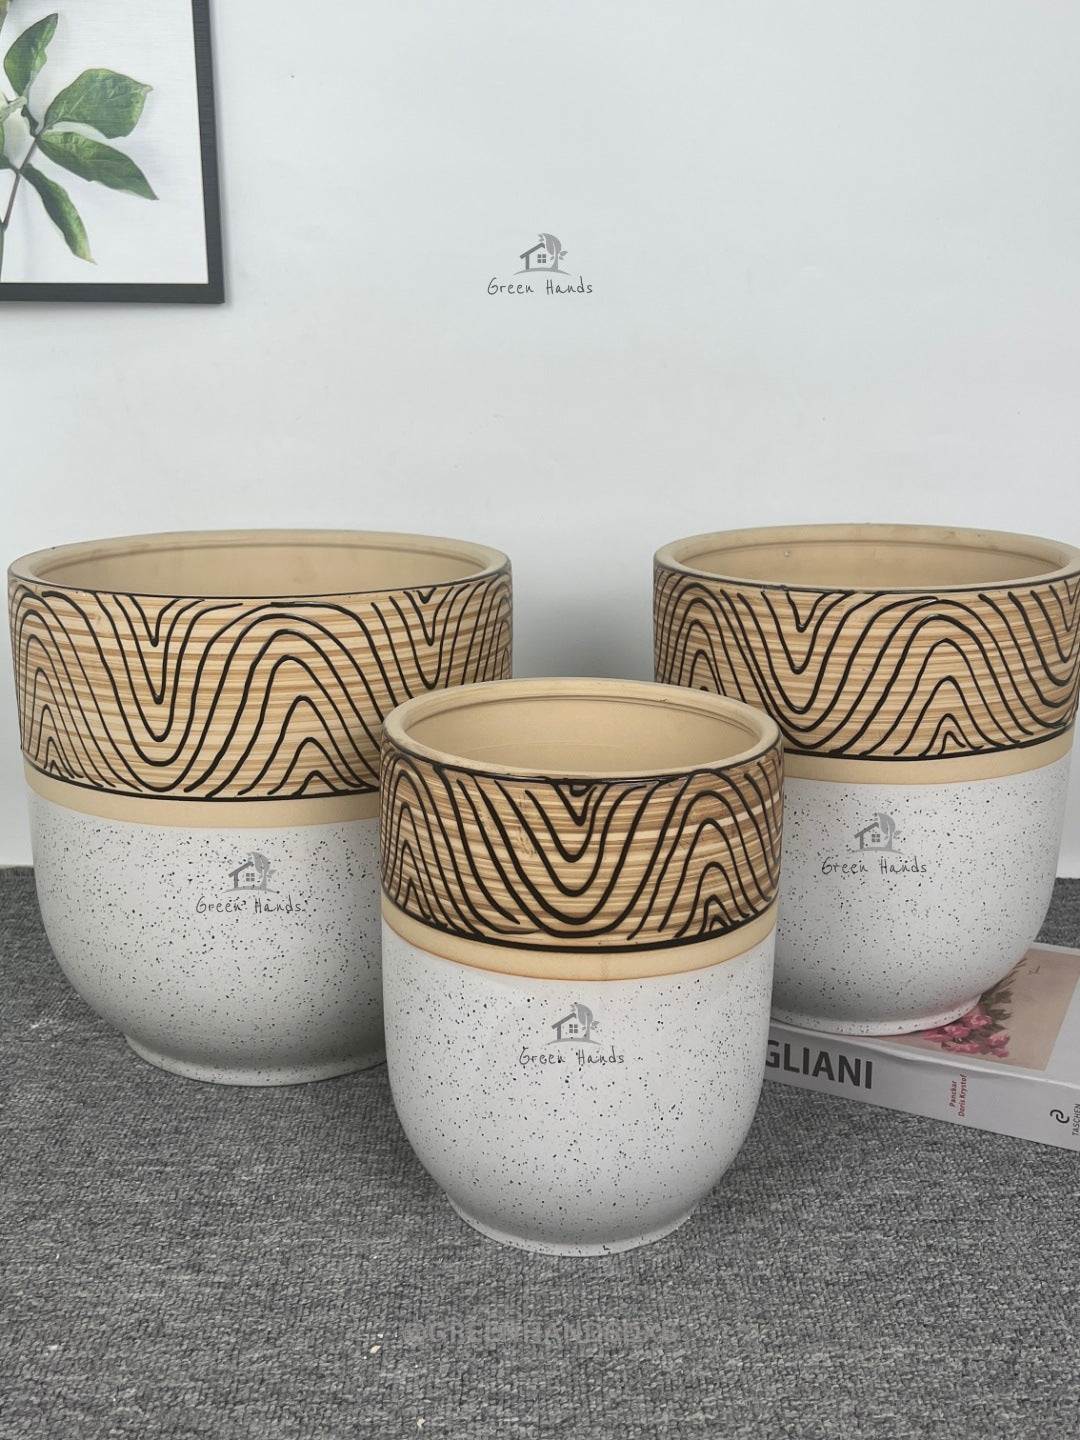 Nature Lover's White Ceramic Pots with Wooden Carving Finish in Dubai & Abu Dhabi: Minimalistic Artistry with Drain Holes and Base Plates